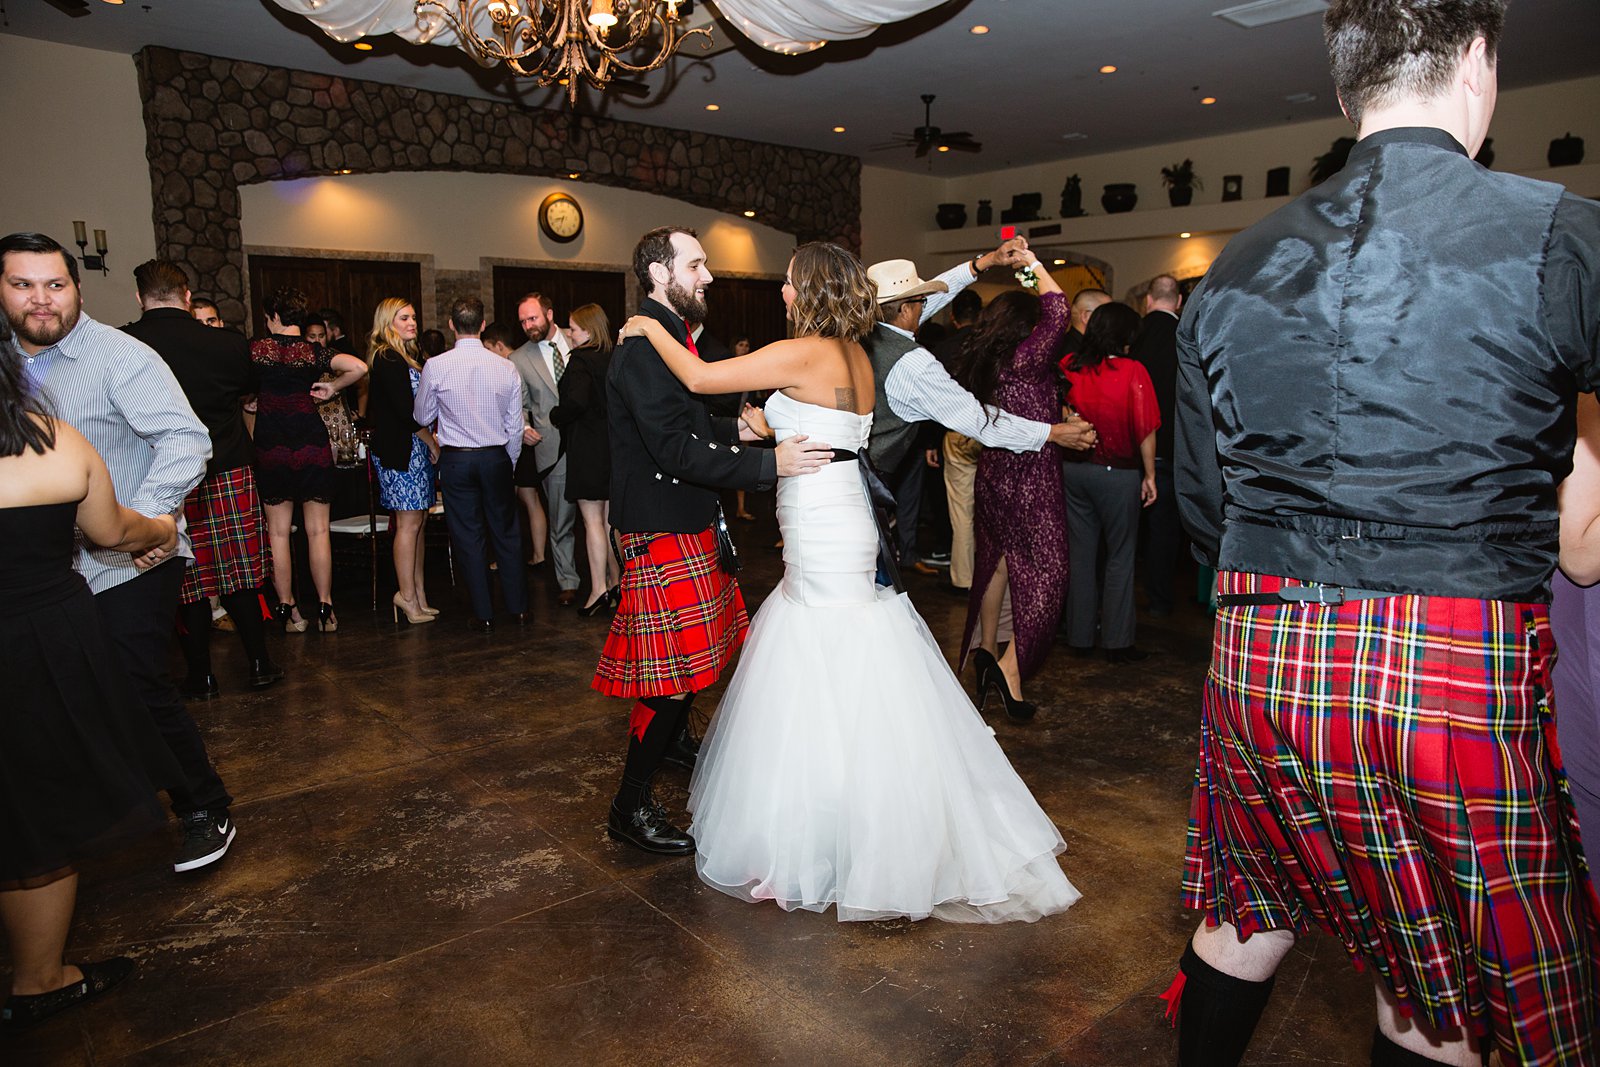 Bride and groom dancing with guests during their wedding reception at the Superstition Manor by Arizona wedding photographers PMA Photography.